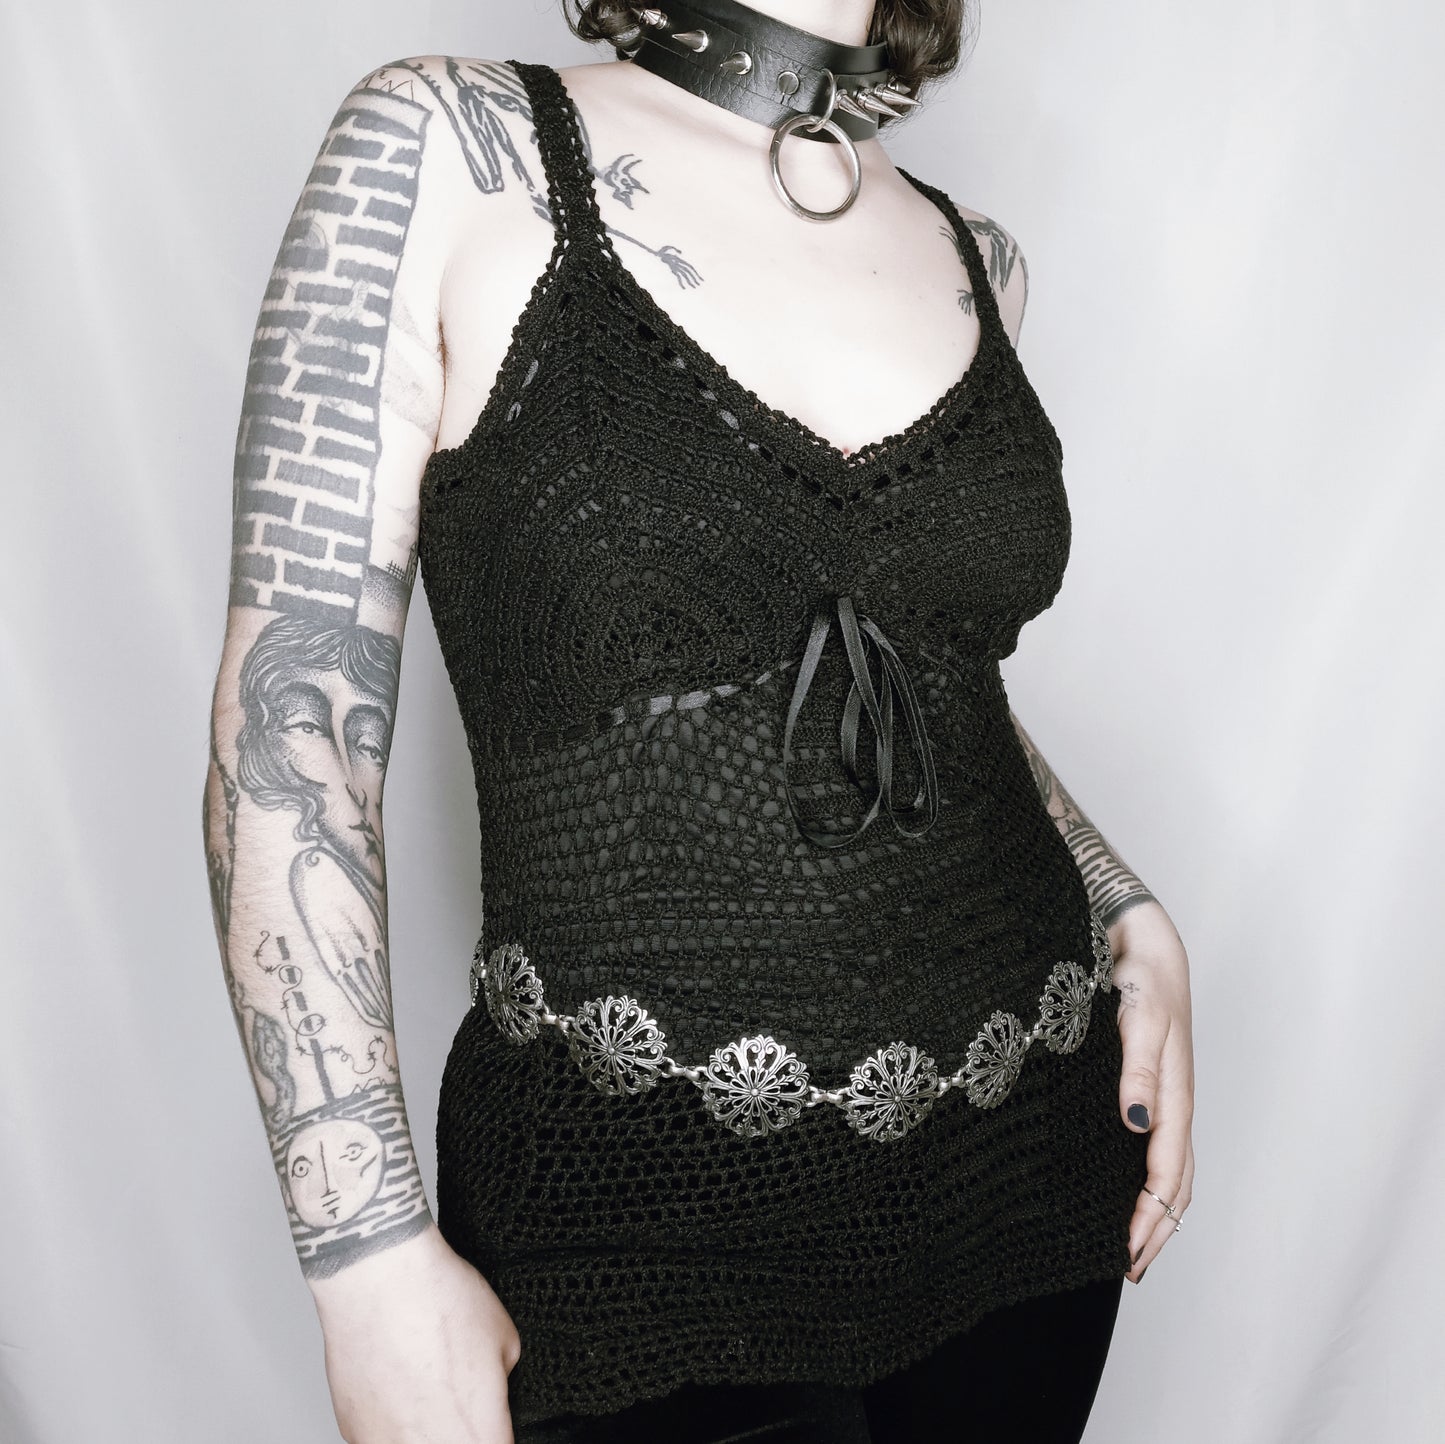 Crochet 90s Witch Top - M